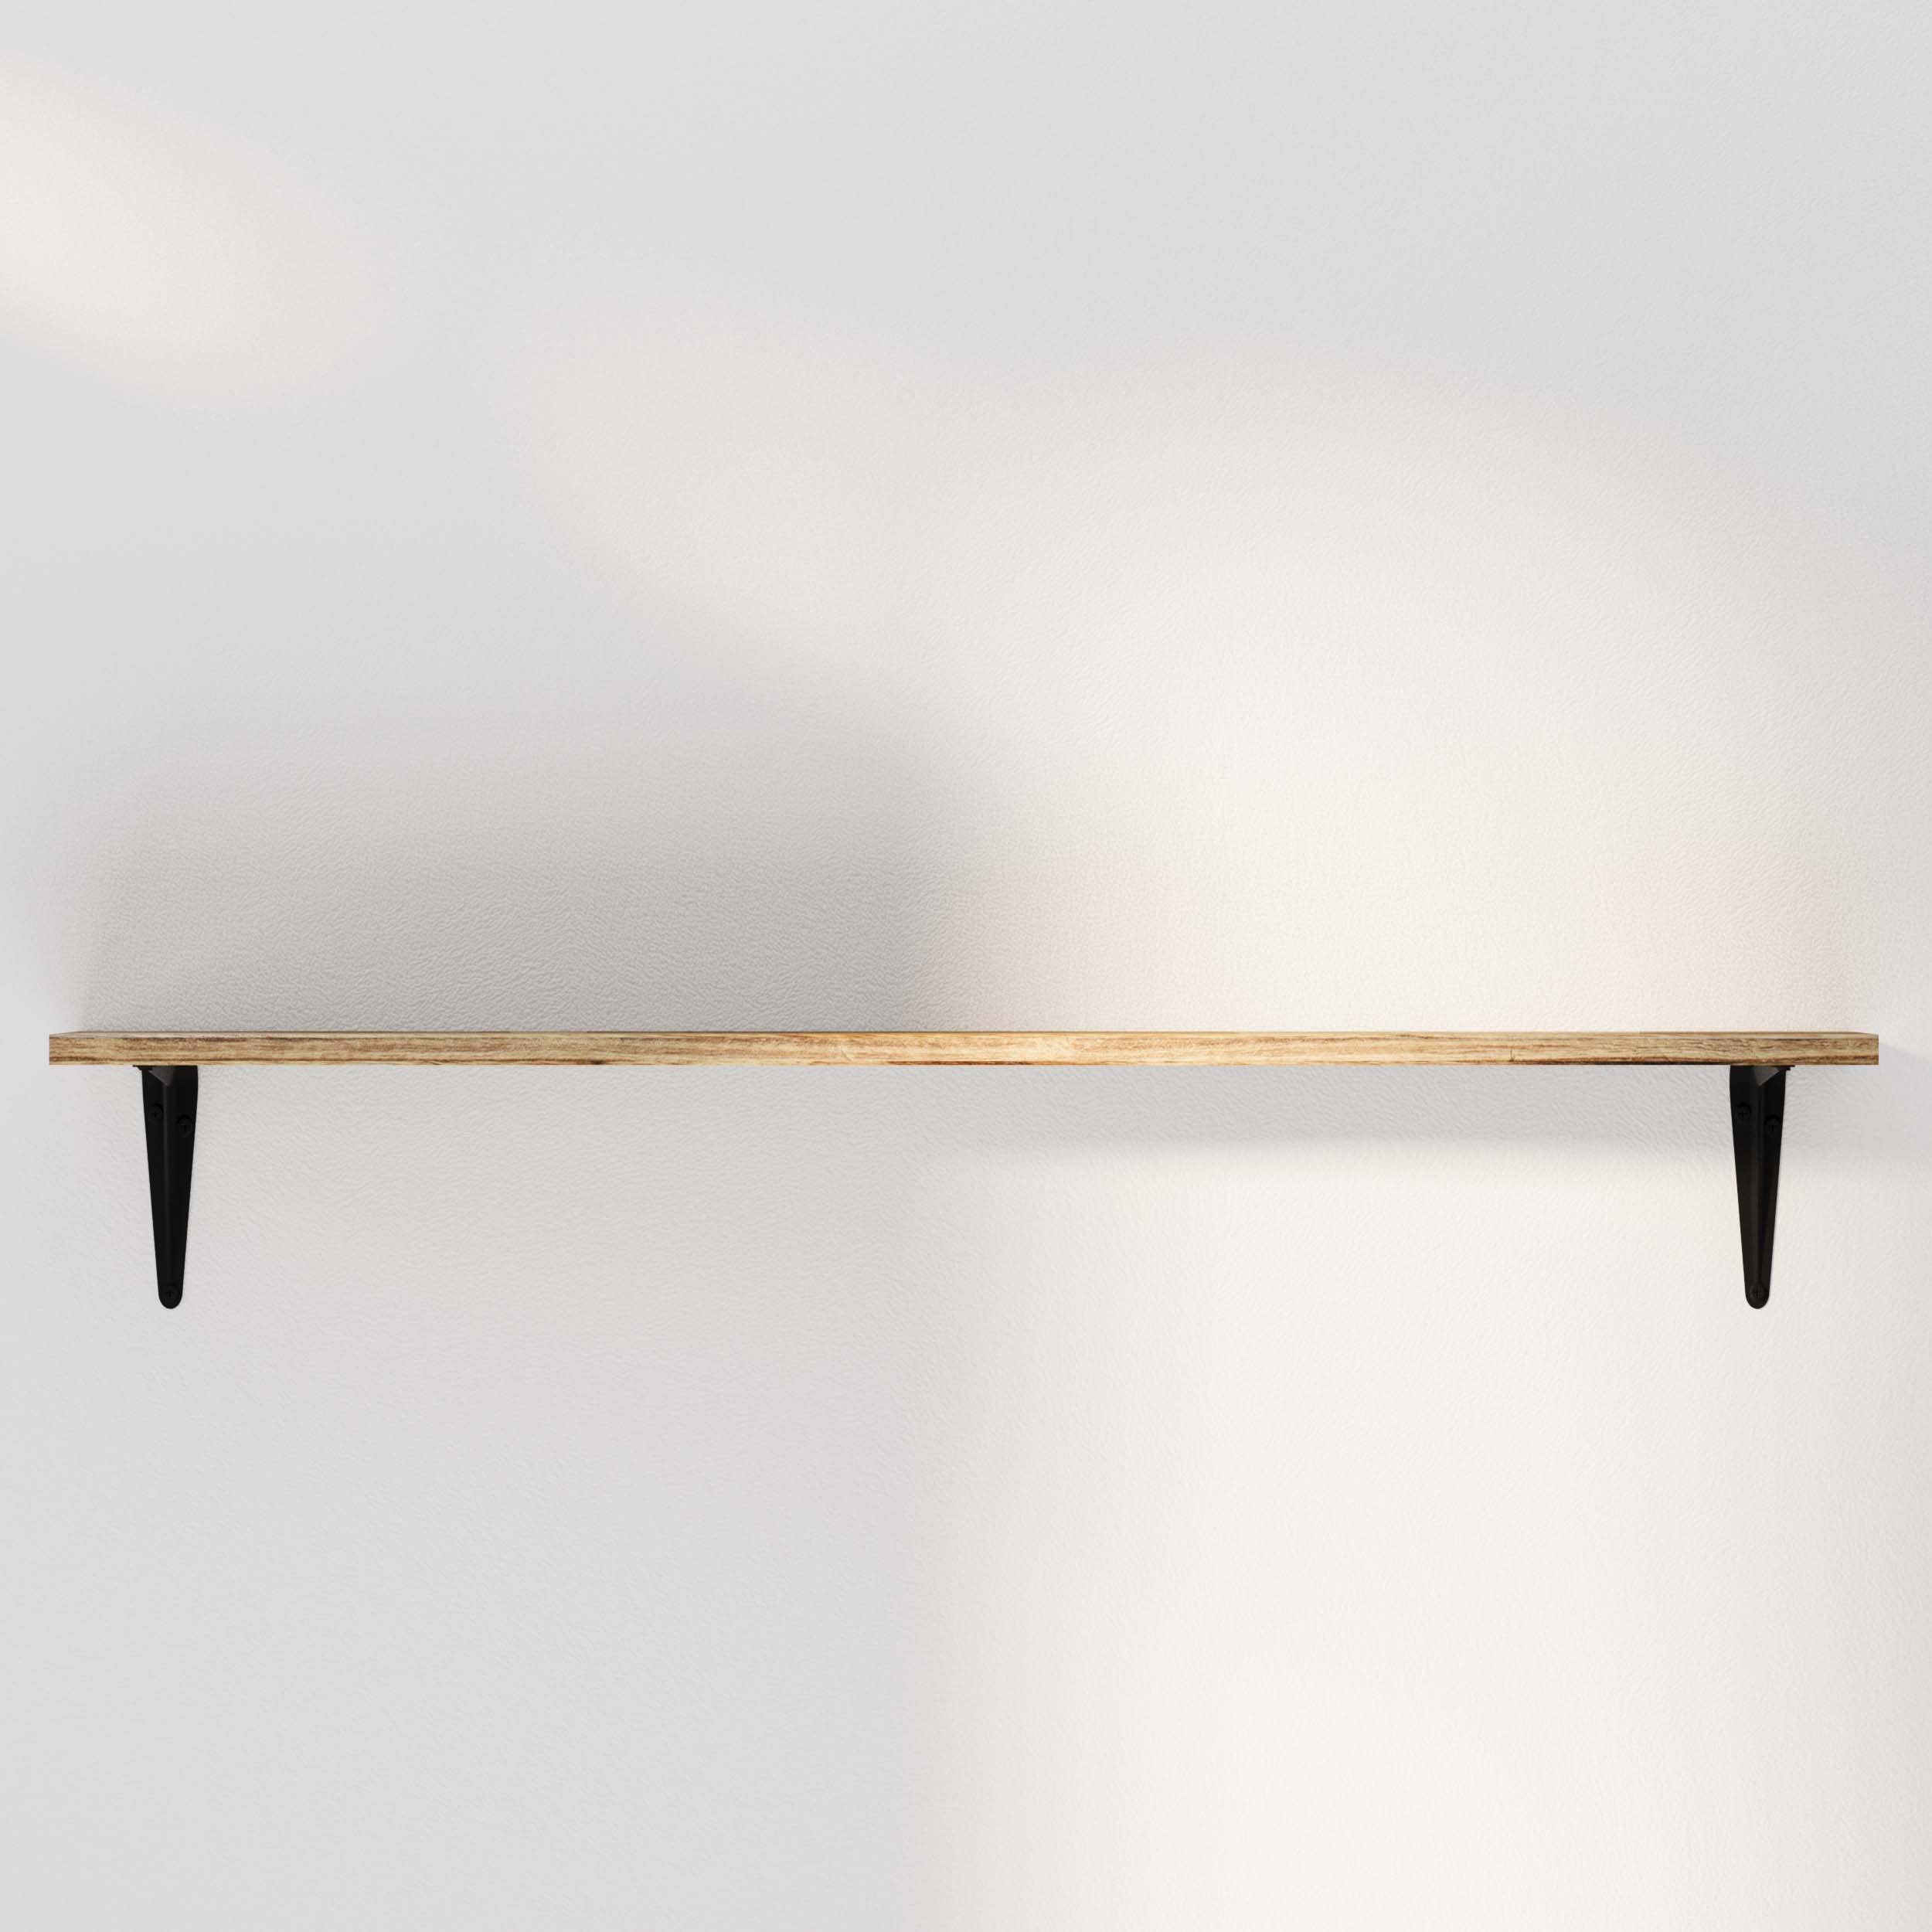 Empty tall shelf burnt mounted on a white wall, showcasing simplicity and functionality.